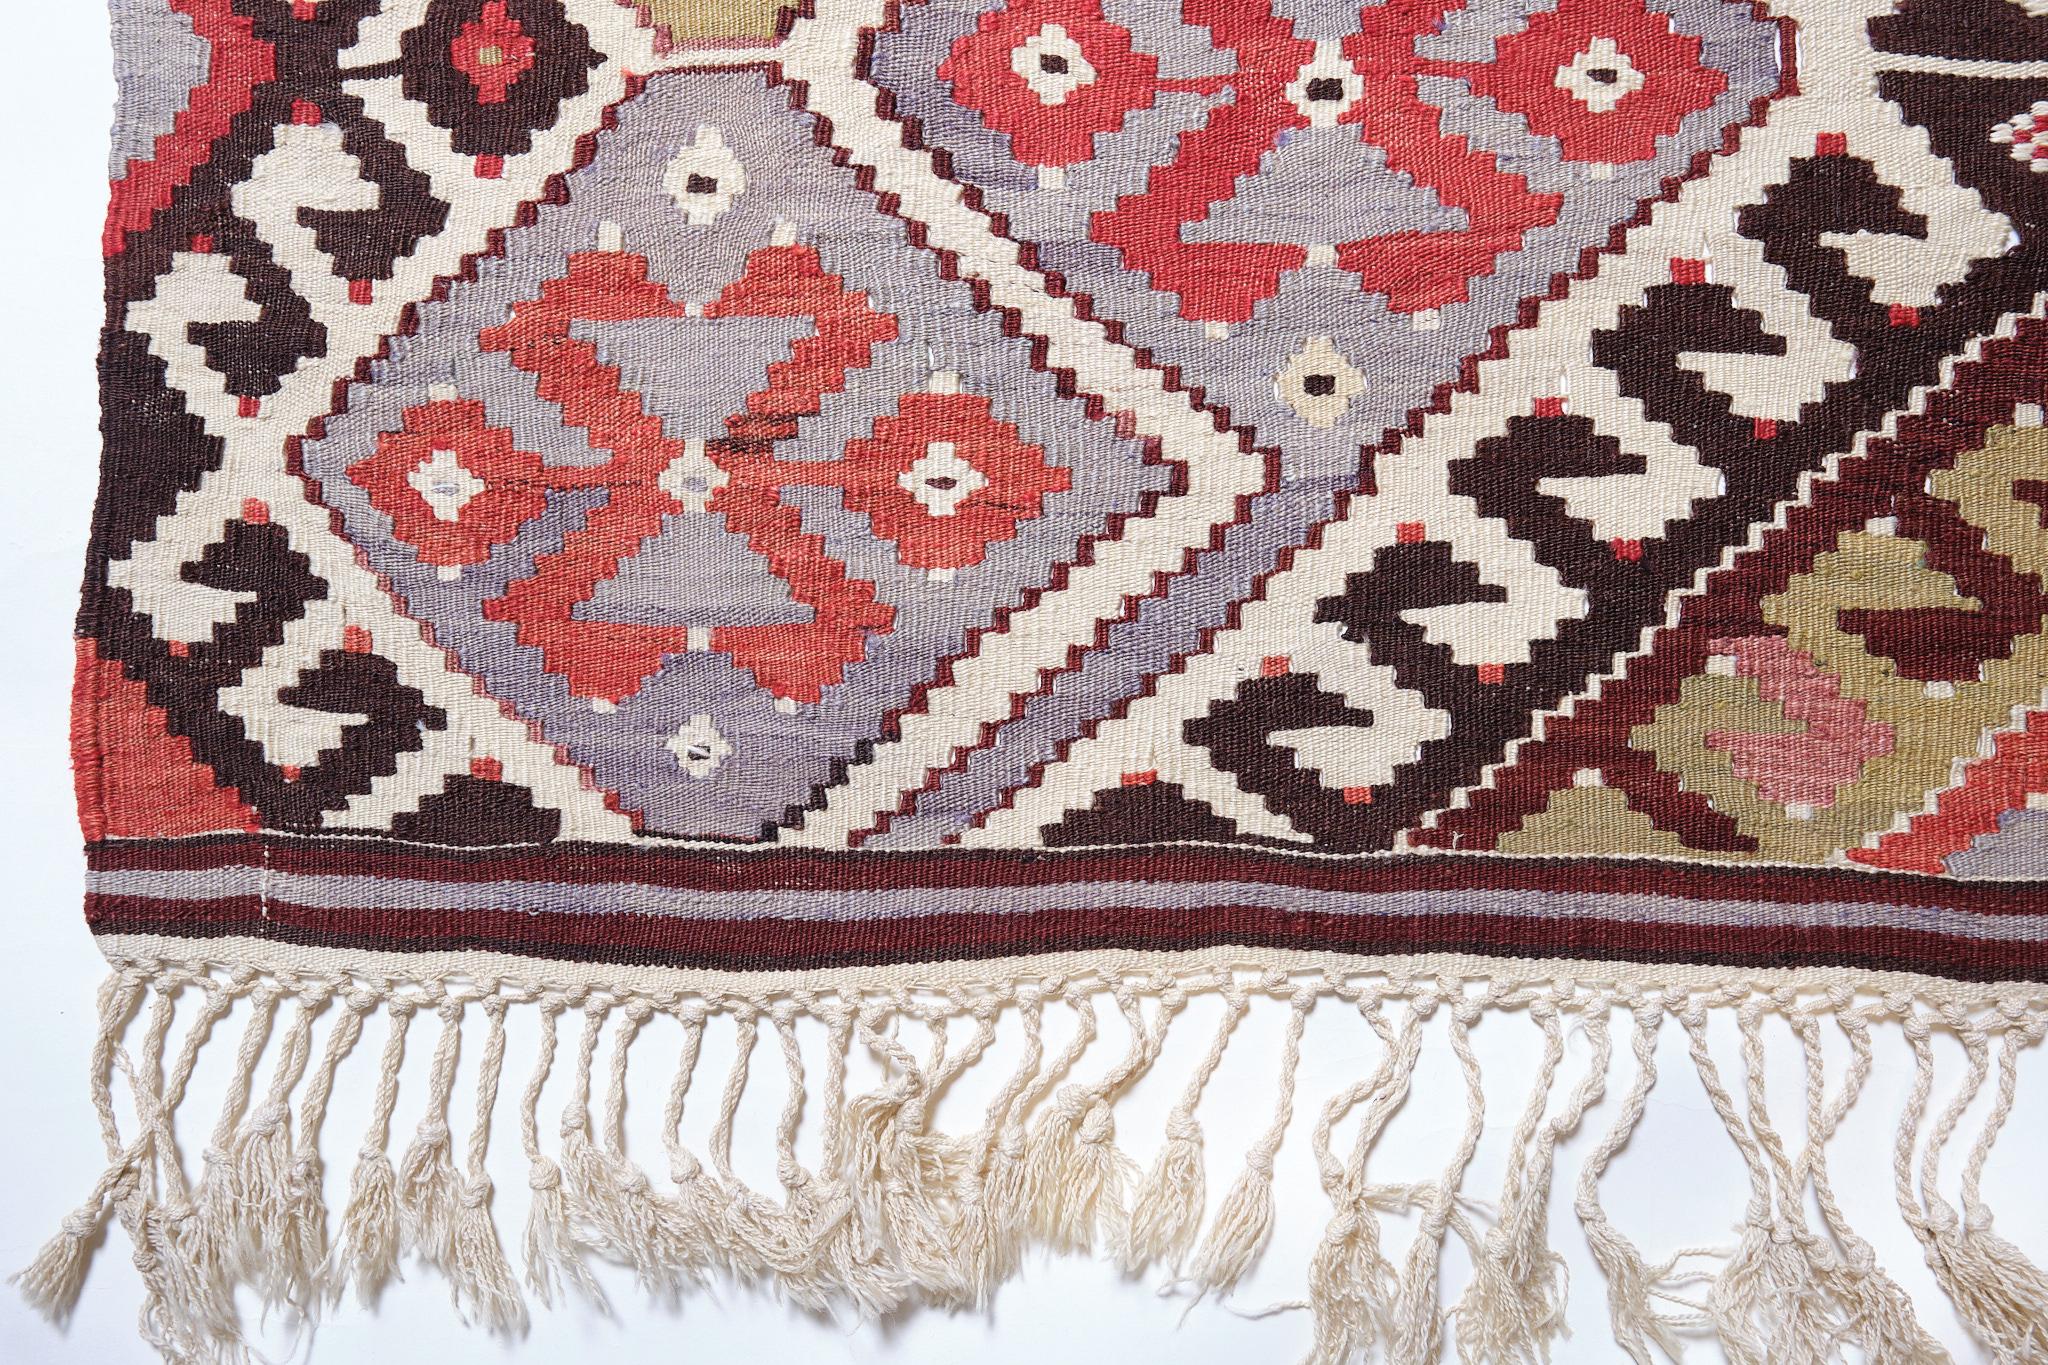 This is a South Anatolian old vintage Kilim from the Antalya region with a rare and beautiful color composition.

Founded in 200 BC by Attalus II, king of Pergamum, Antalya, then named Attaleia, has always been a bustling port. During the